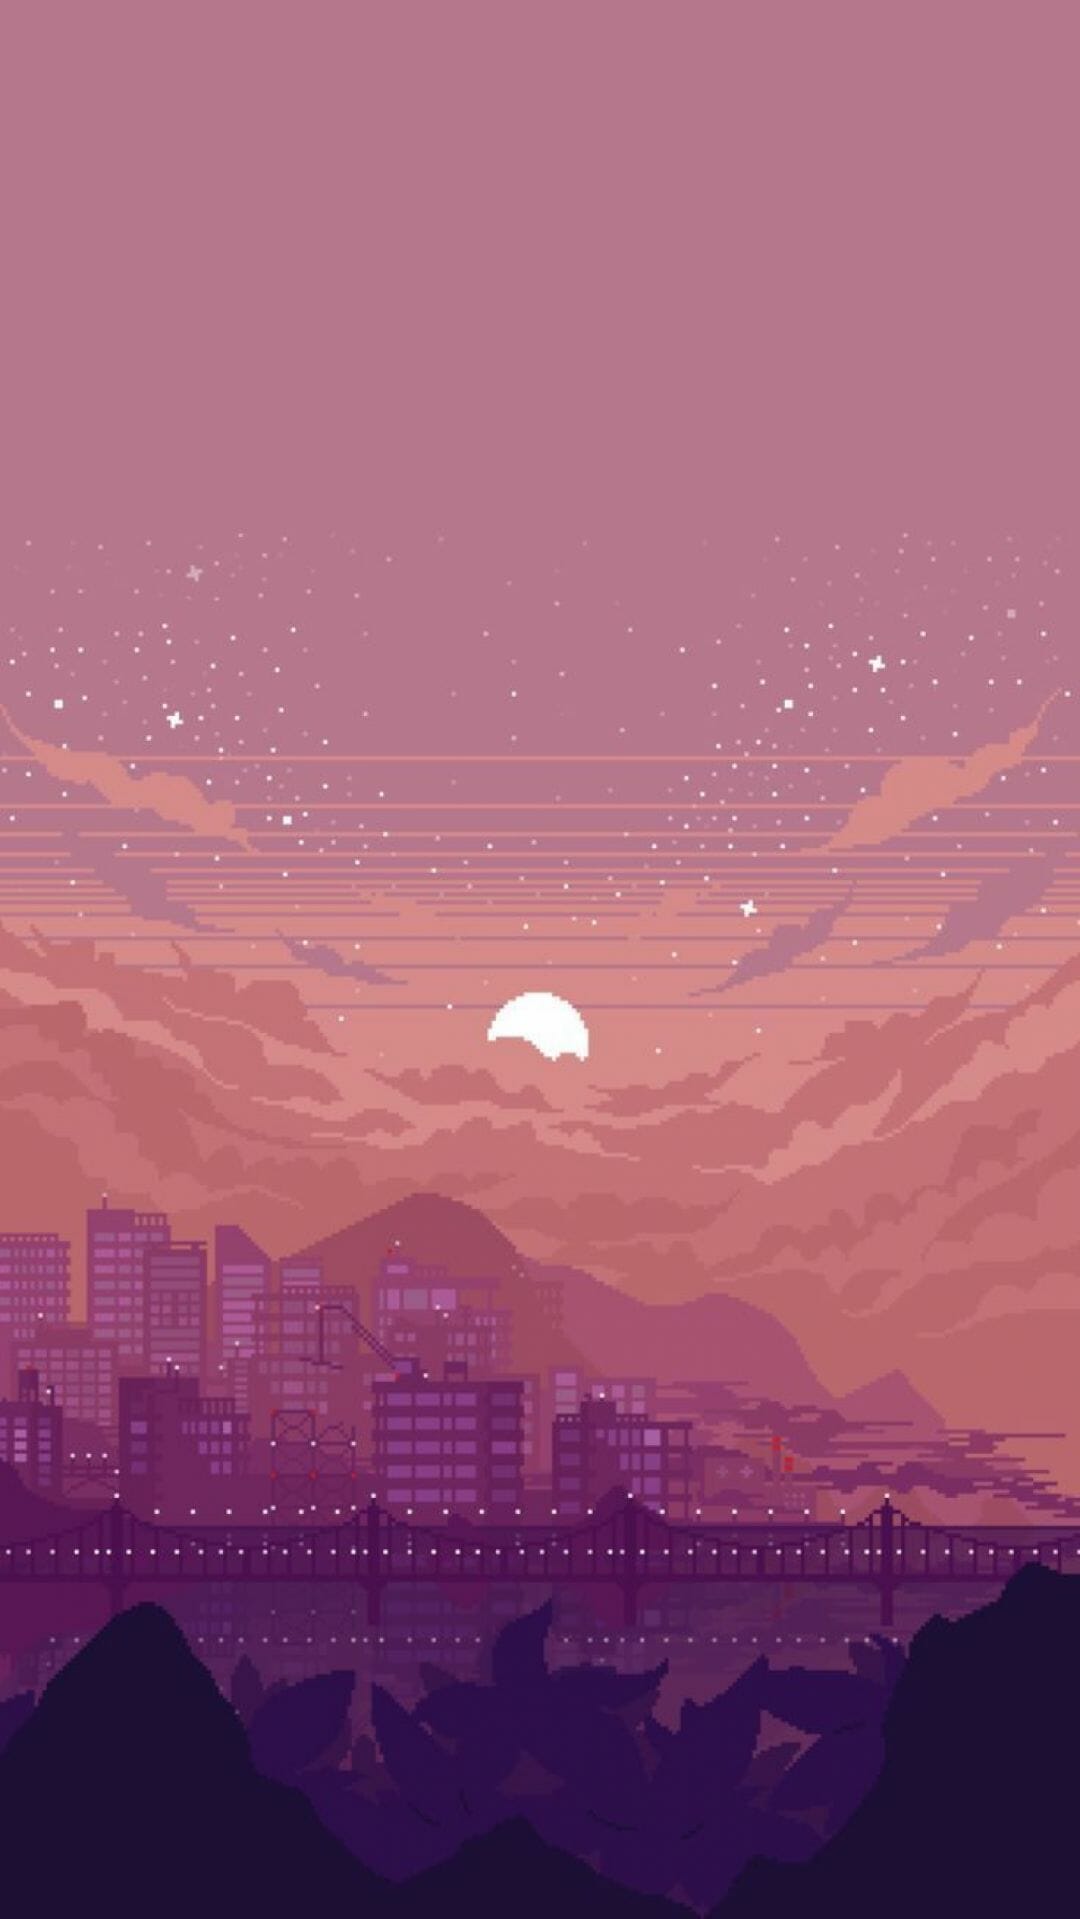 Pixel wallpaper about a month Cafe, #about (2022)